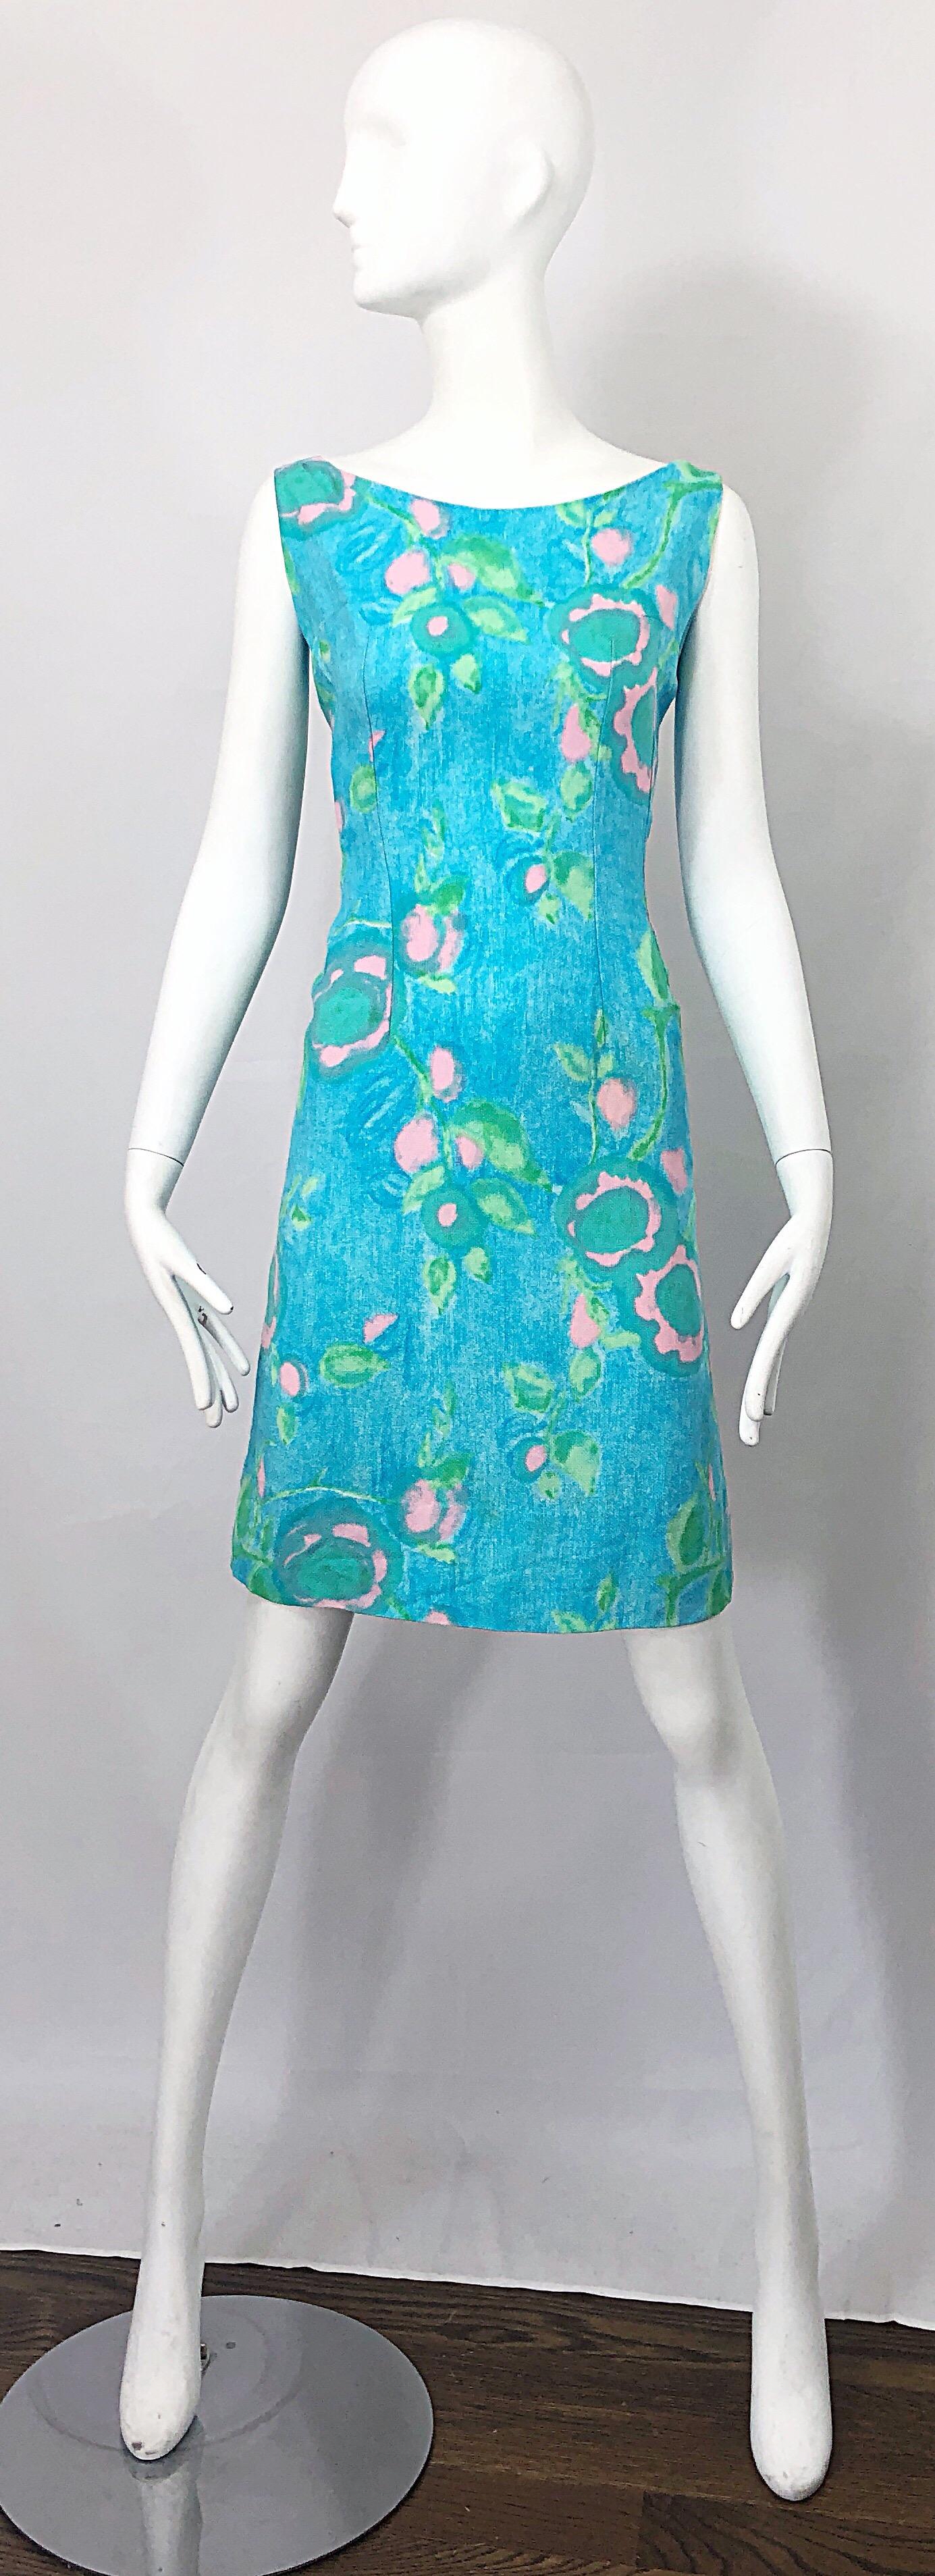 Chic early 60s blue, green and pink pastel sleeveless shift dress! Features a soft linen / cotton blend, and is fully lined. Full metal zipper up the back with hook-and-eye closure. Great belted or alone, day or evening. Perfect with flats, sandals